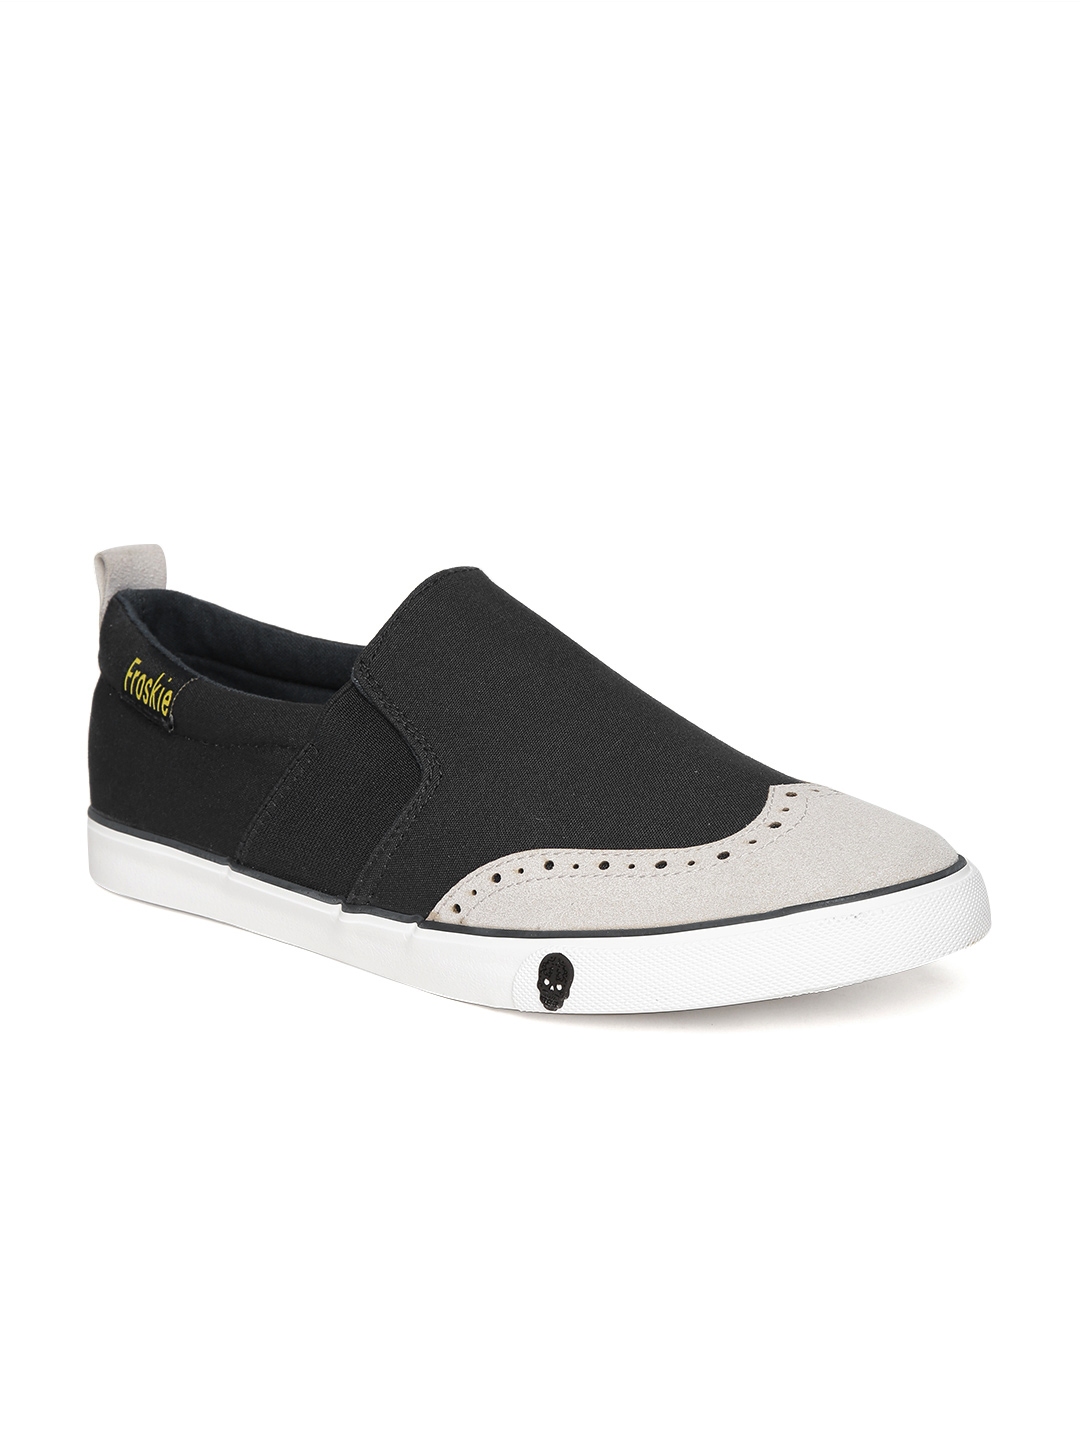 Colourblocked Slip Ons - Casual Shoes 